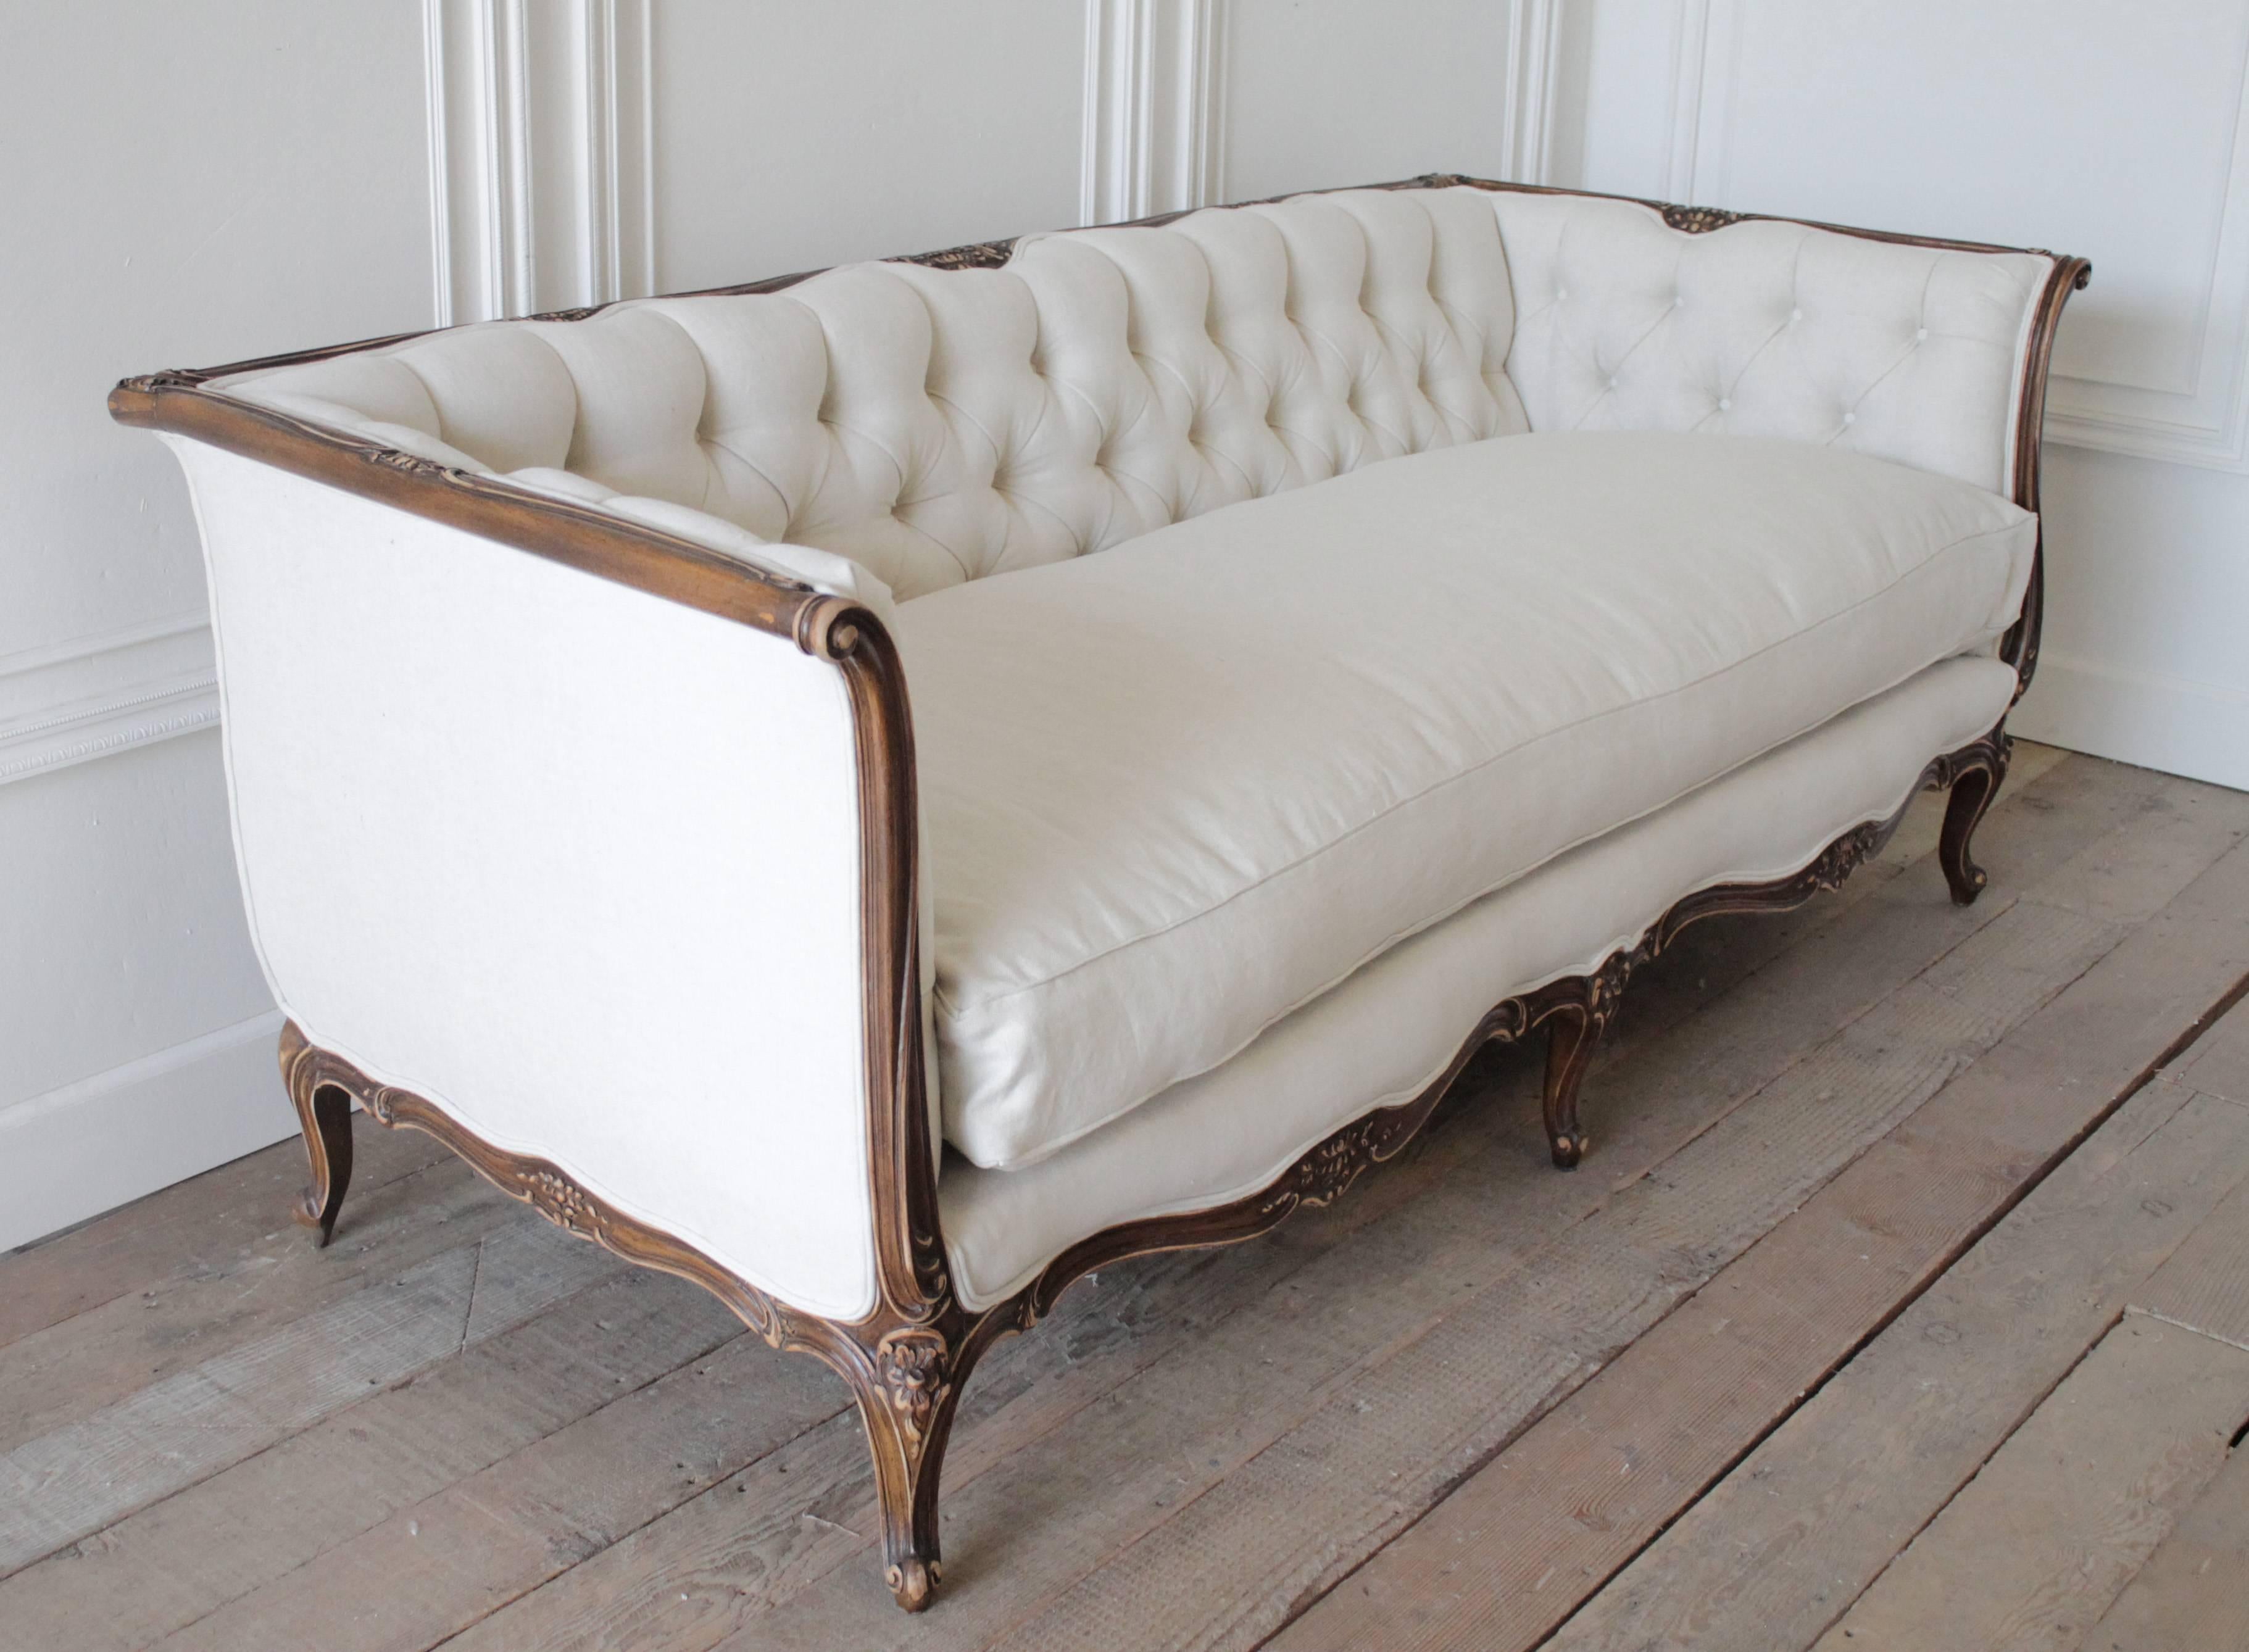 Beautiful Louis XV style sofa with solid wood carved frame, has been reupholstered in our 100% organic Belgian linen. The seat cushion is a new custom bench style, down wrapped cloud cushion. The seat cushion cover does have a zipper to remove if